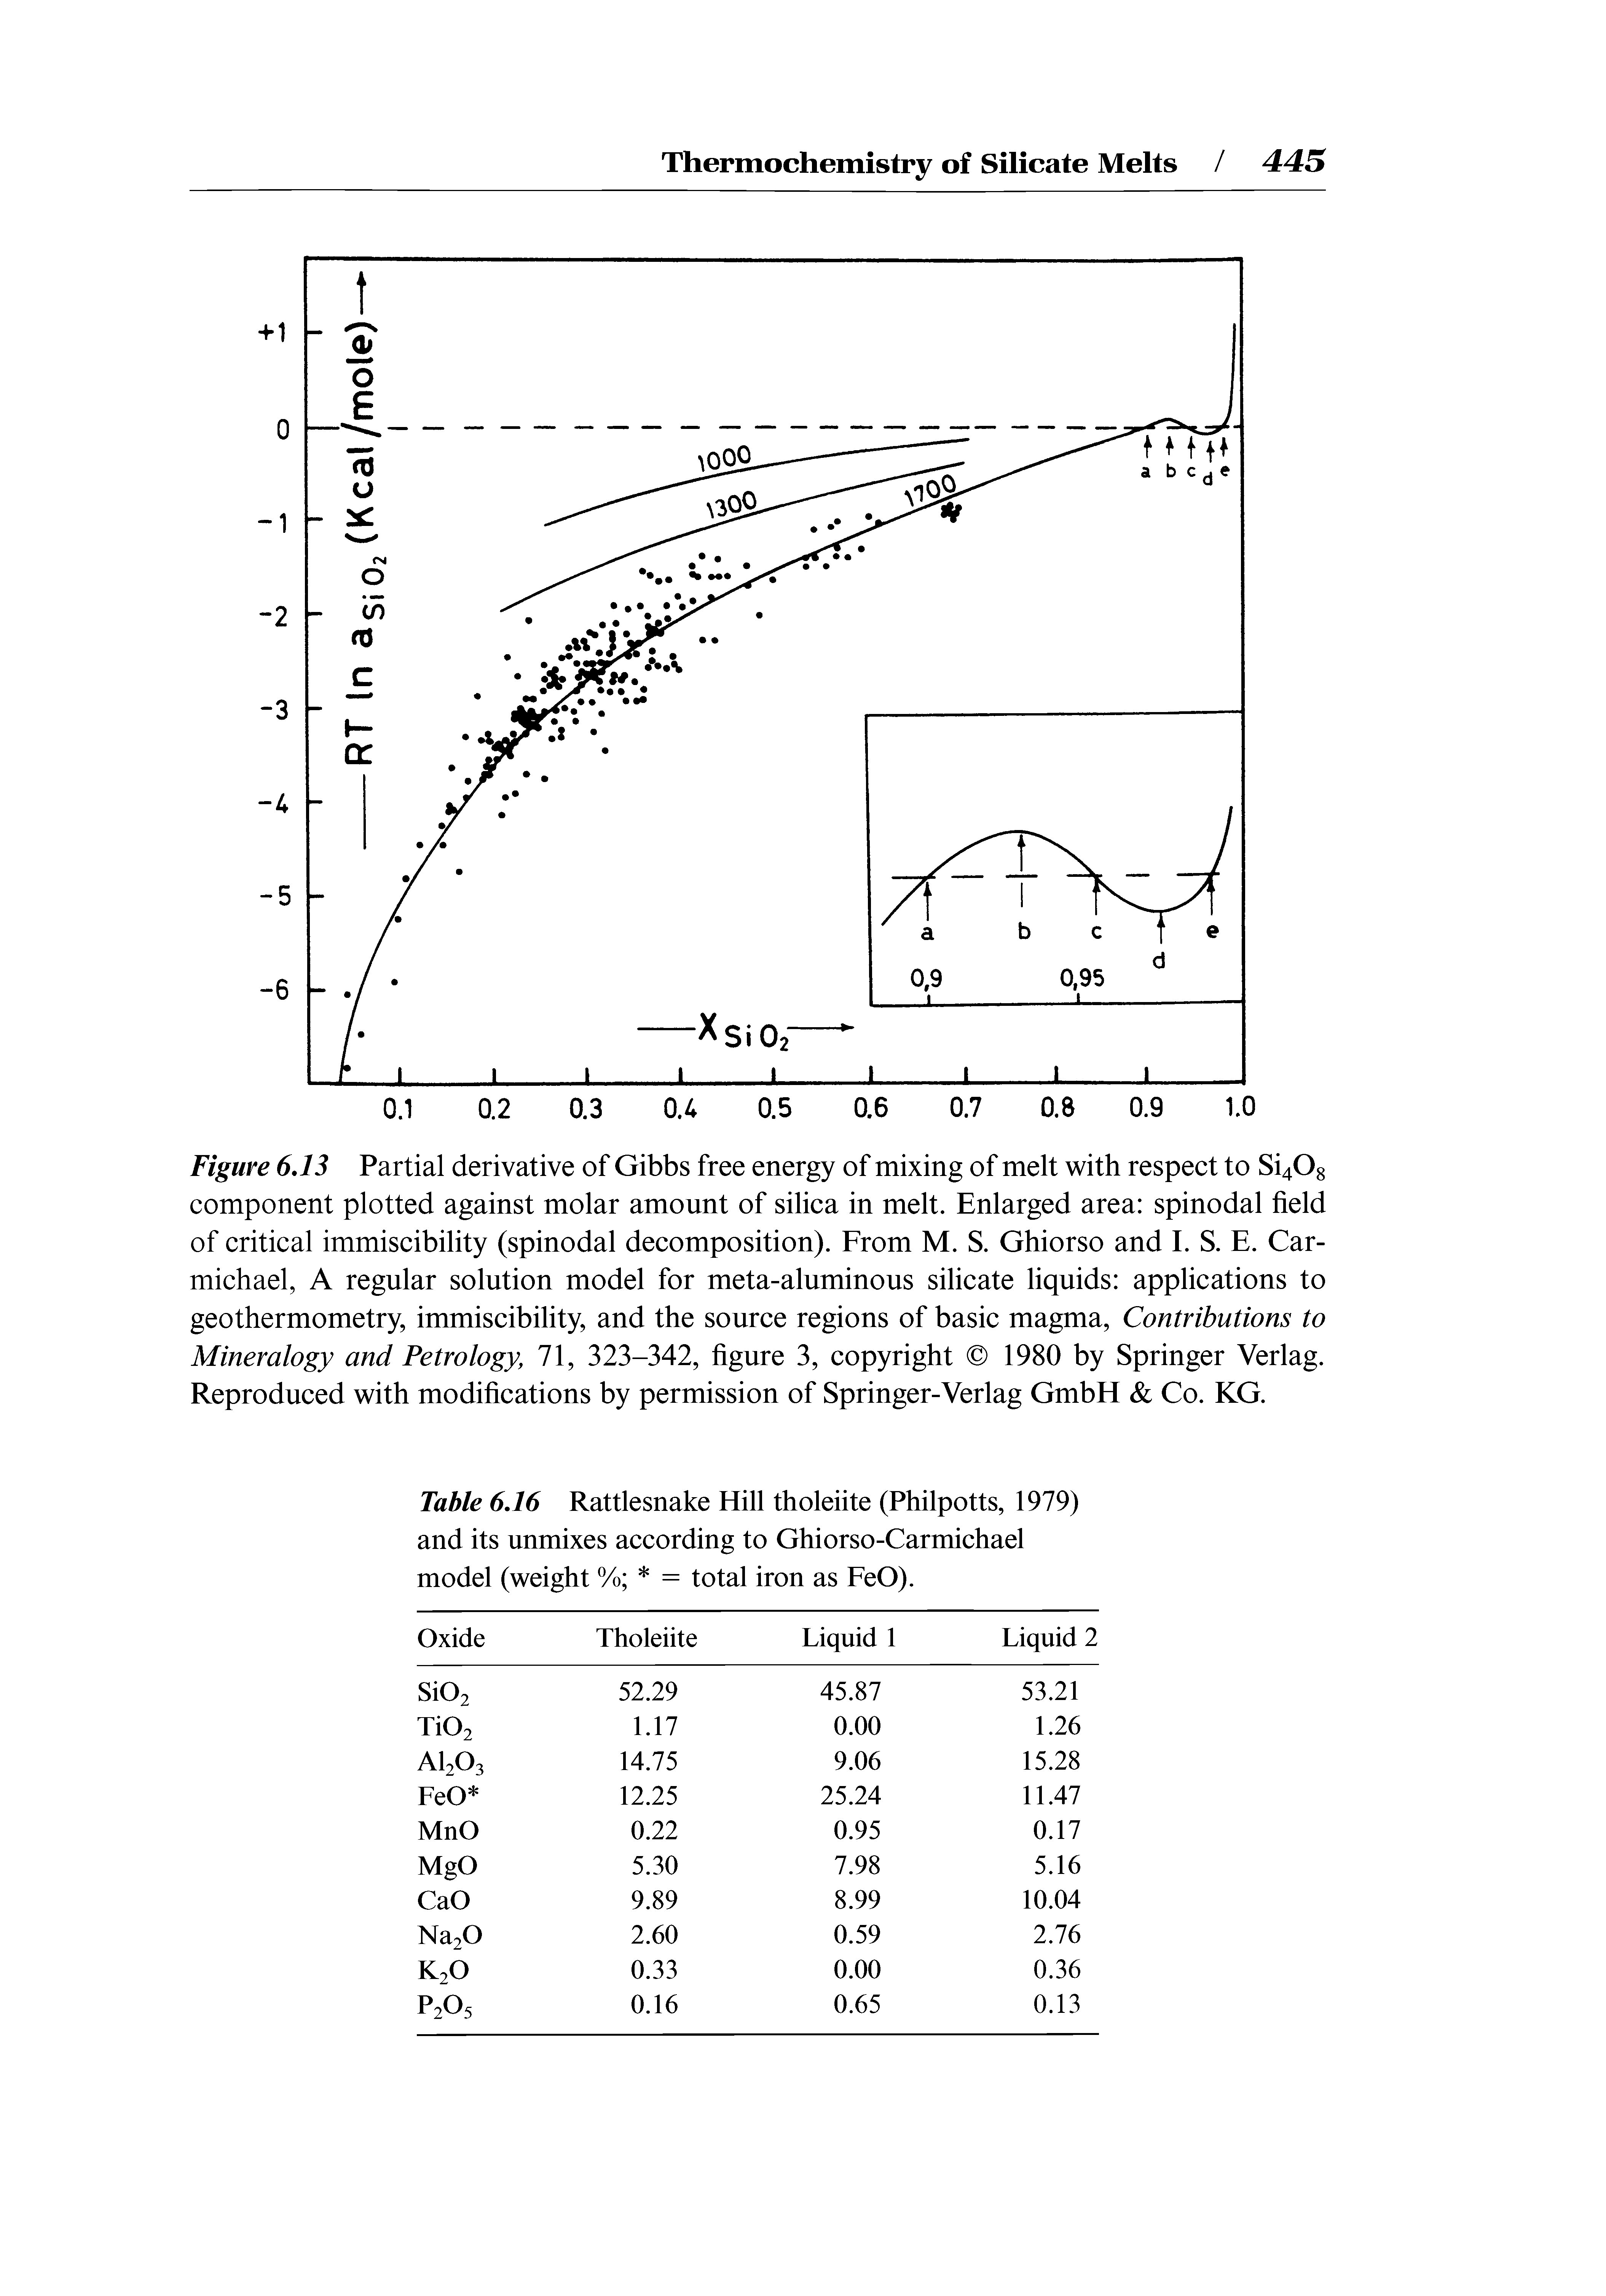 Table 6.16 Rattlesnake Hill tholeiite (Philpotts, 1979) and its unmixes according to Ghiorso-Carmichael model (weight % = total iron as FeO).